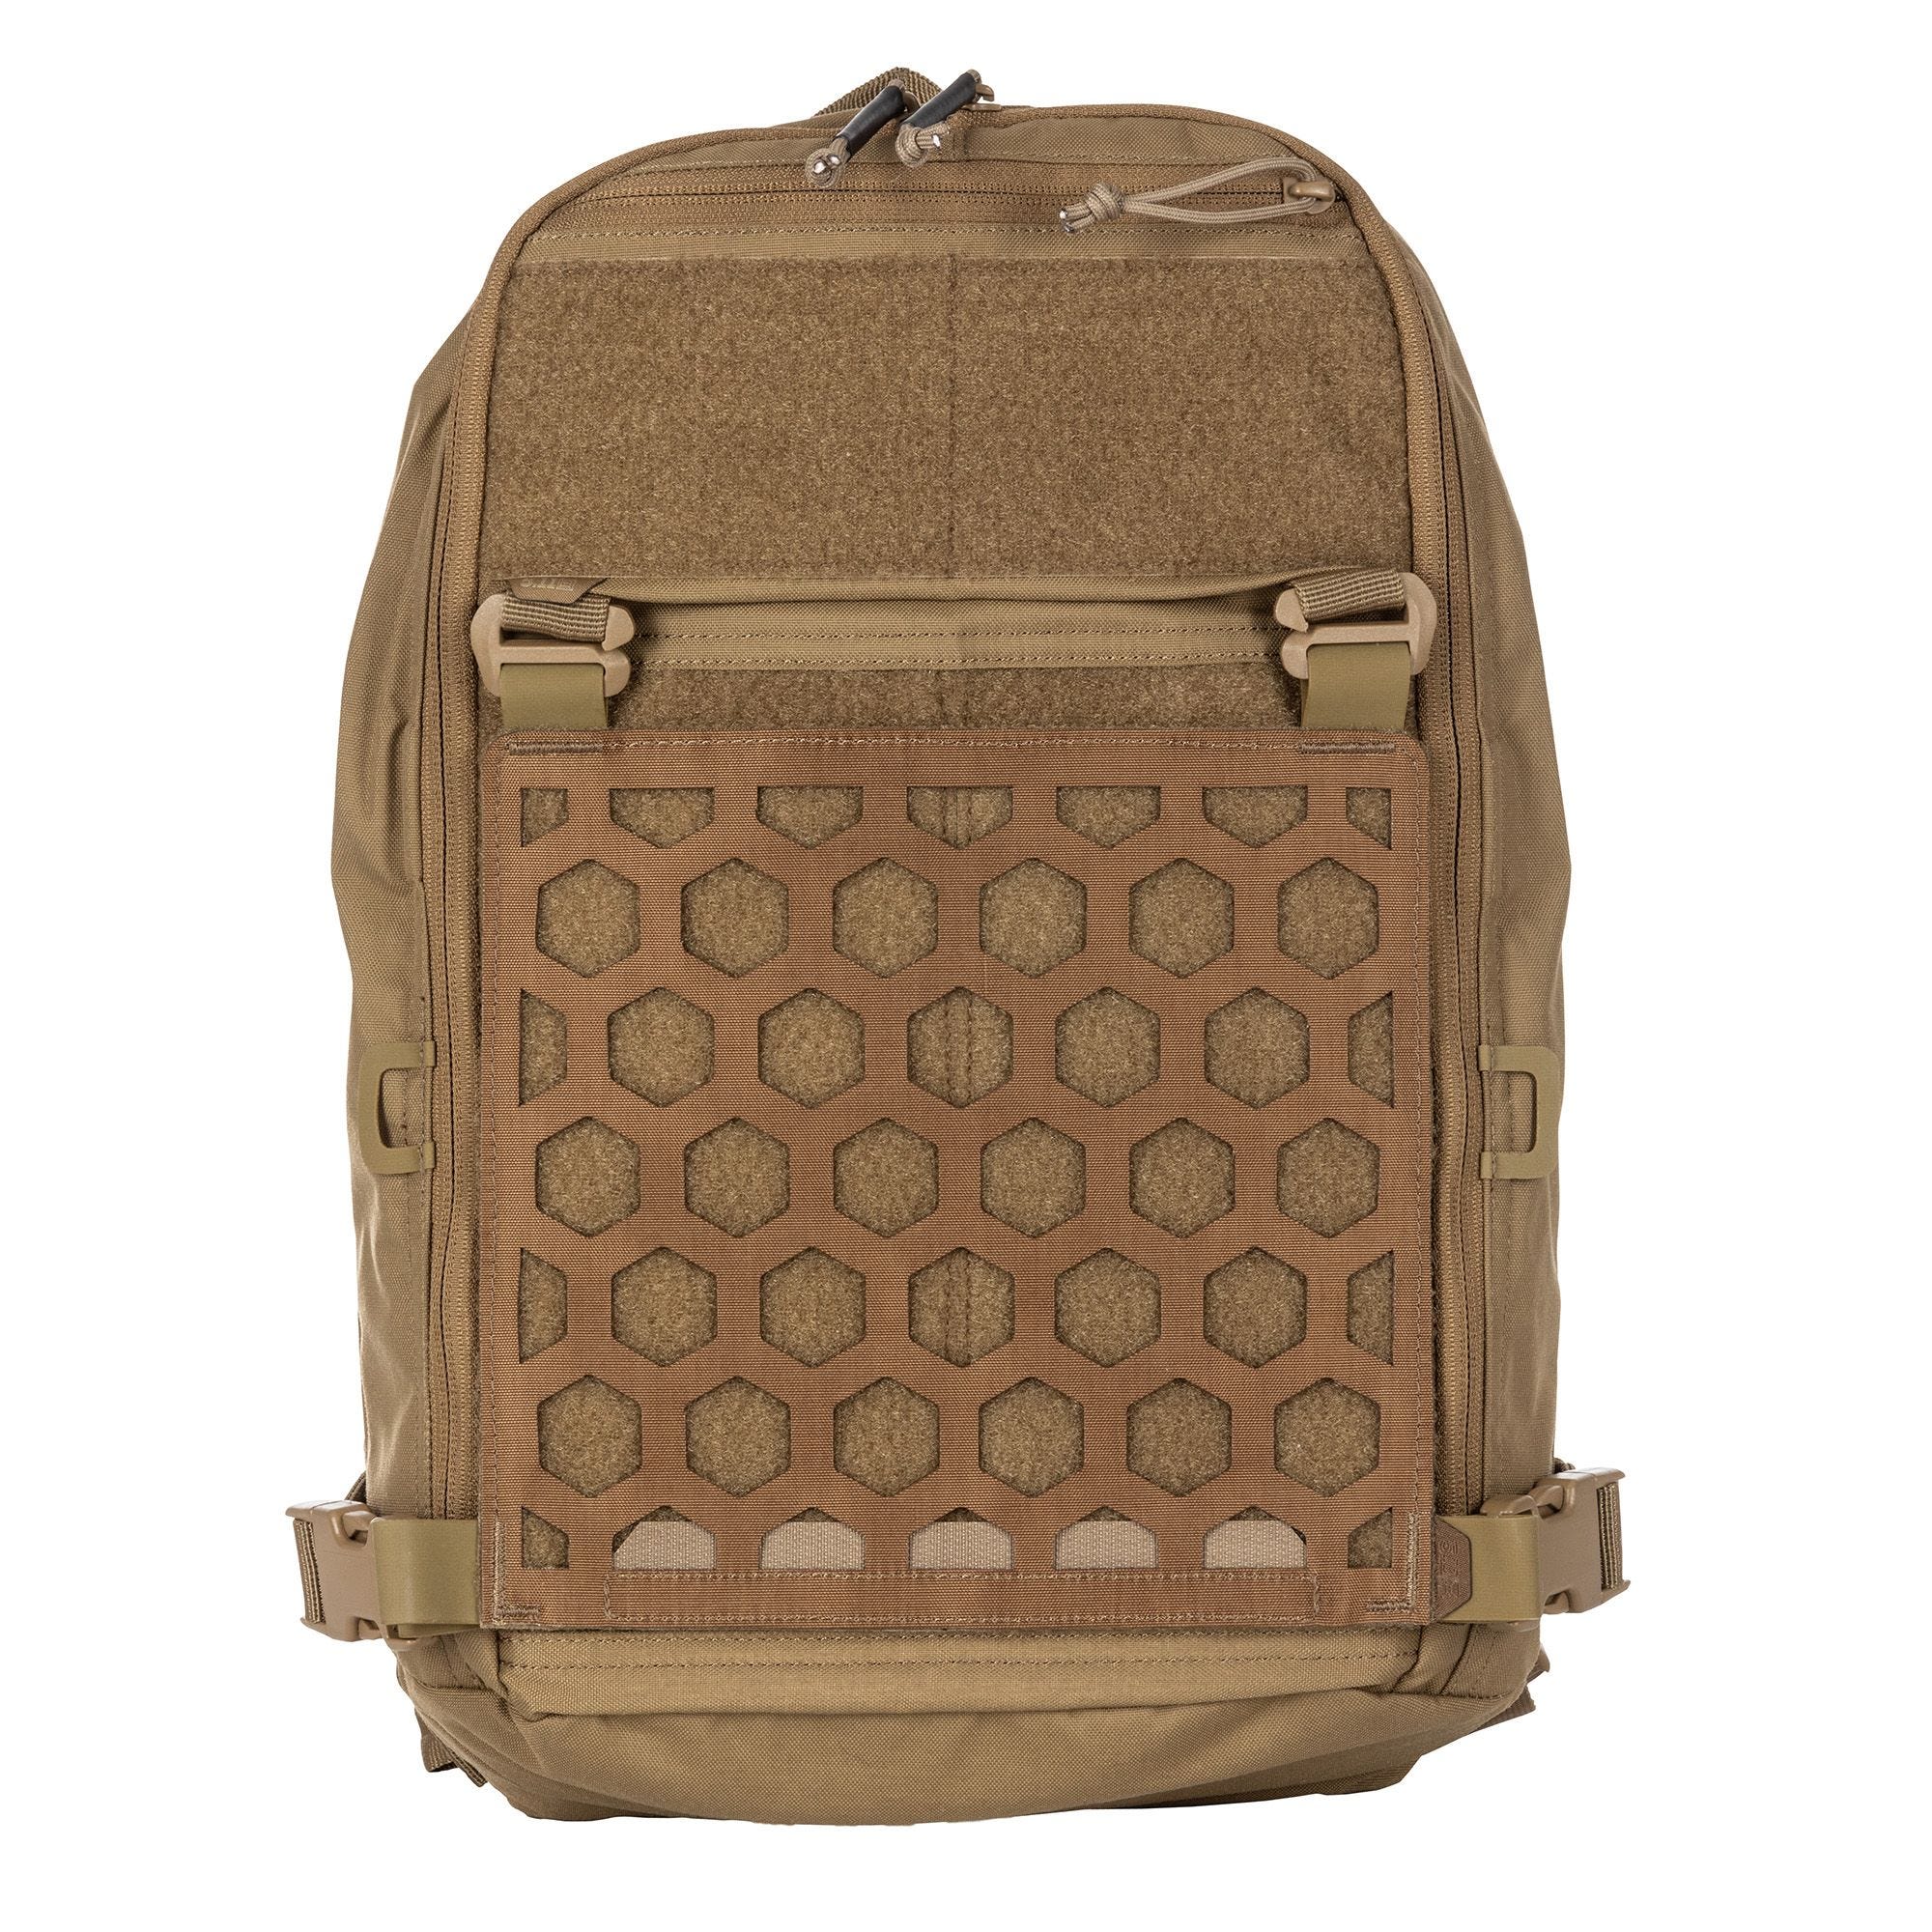 Balo 5.11tactical AMPC PACK